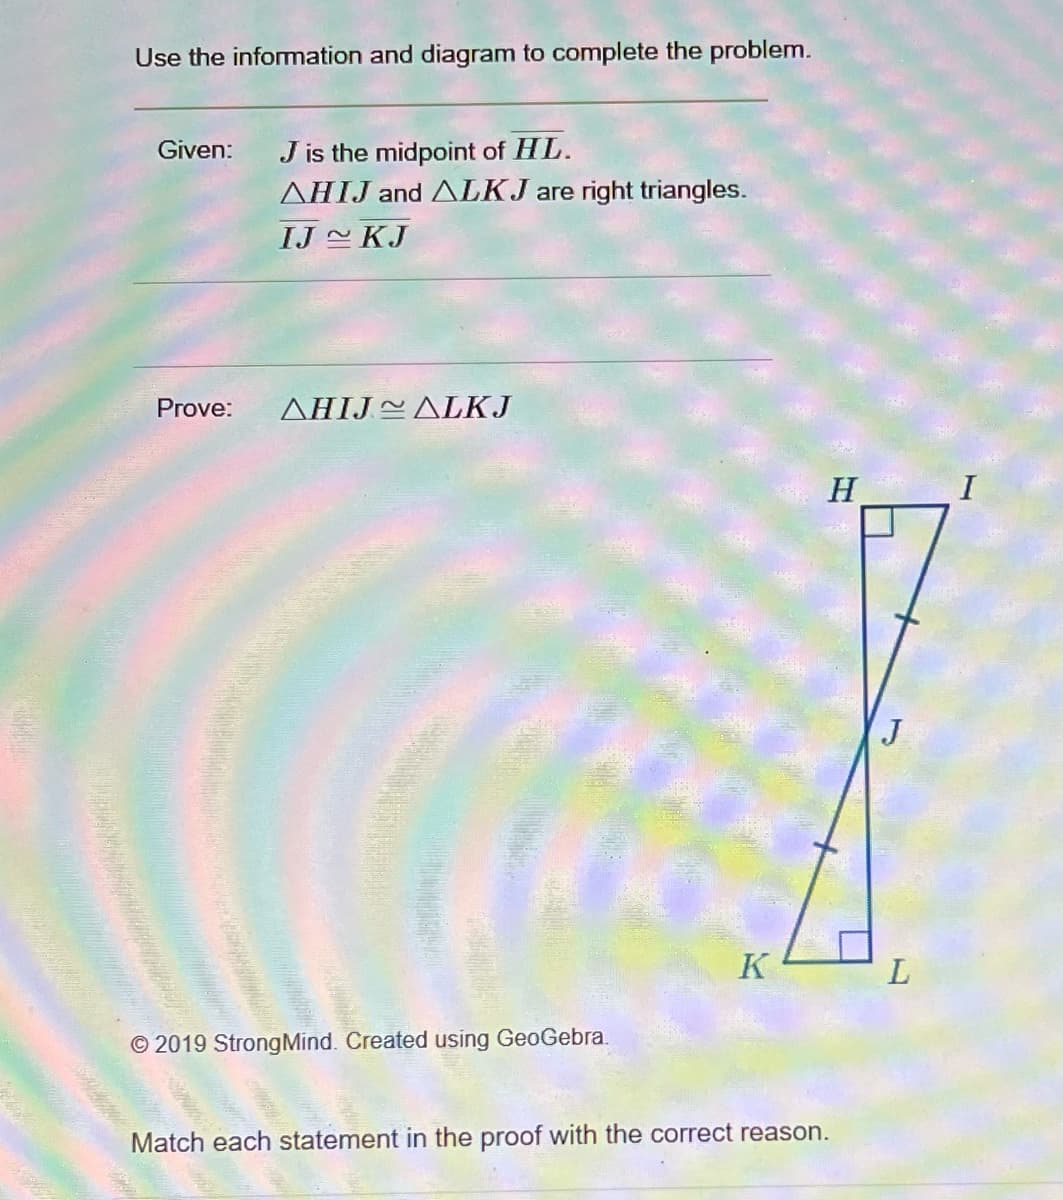 Use the information and diagram to complete the problem.
Given:
Prove:
J is the midpoint of HL.
AHIJ and ALKJ are right triangles.
IJ KJ
AHIJALKJ
©2019 Strong Mind. Created using GeoGebra.
K
H
Match each statement in the proof with the correct reason.
J
L